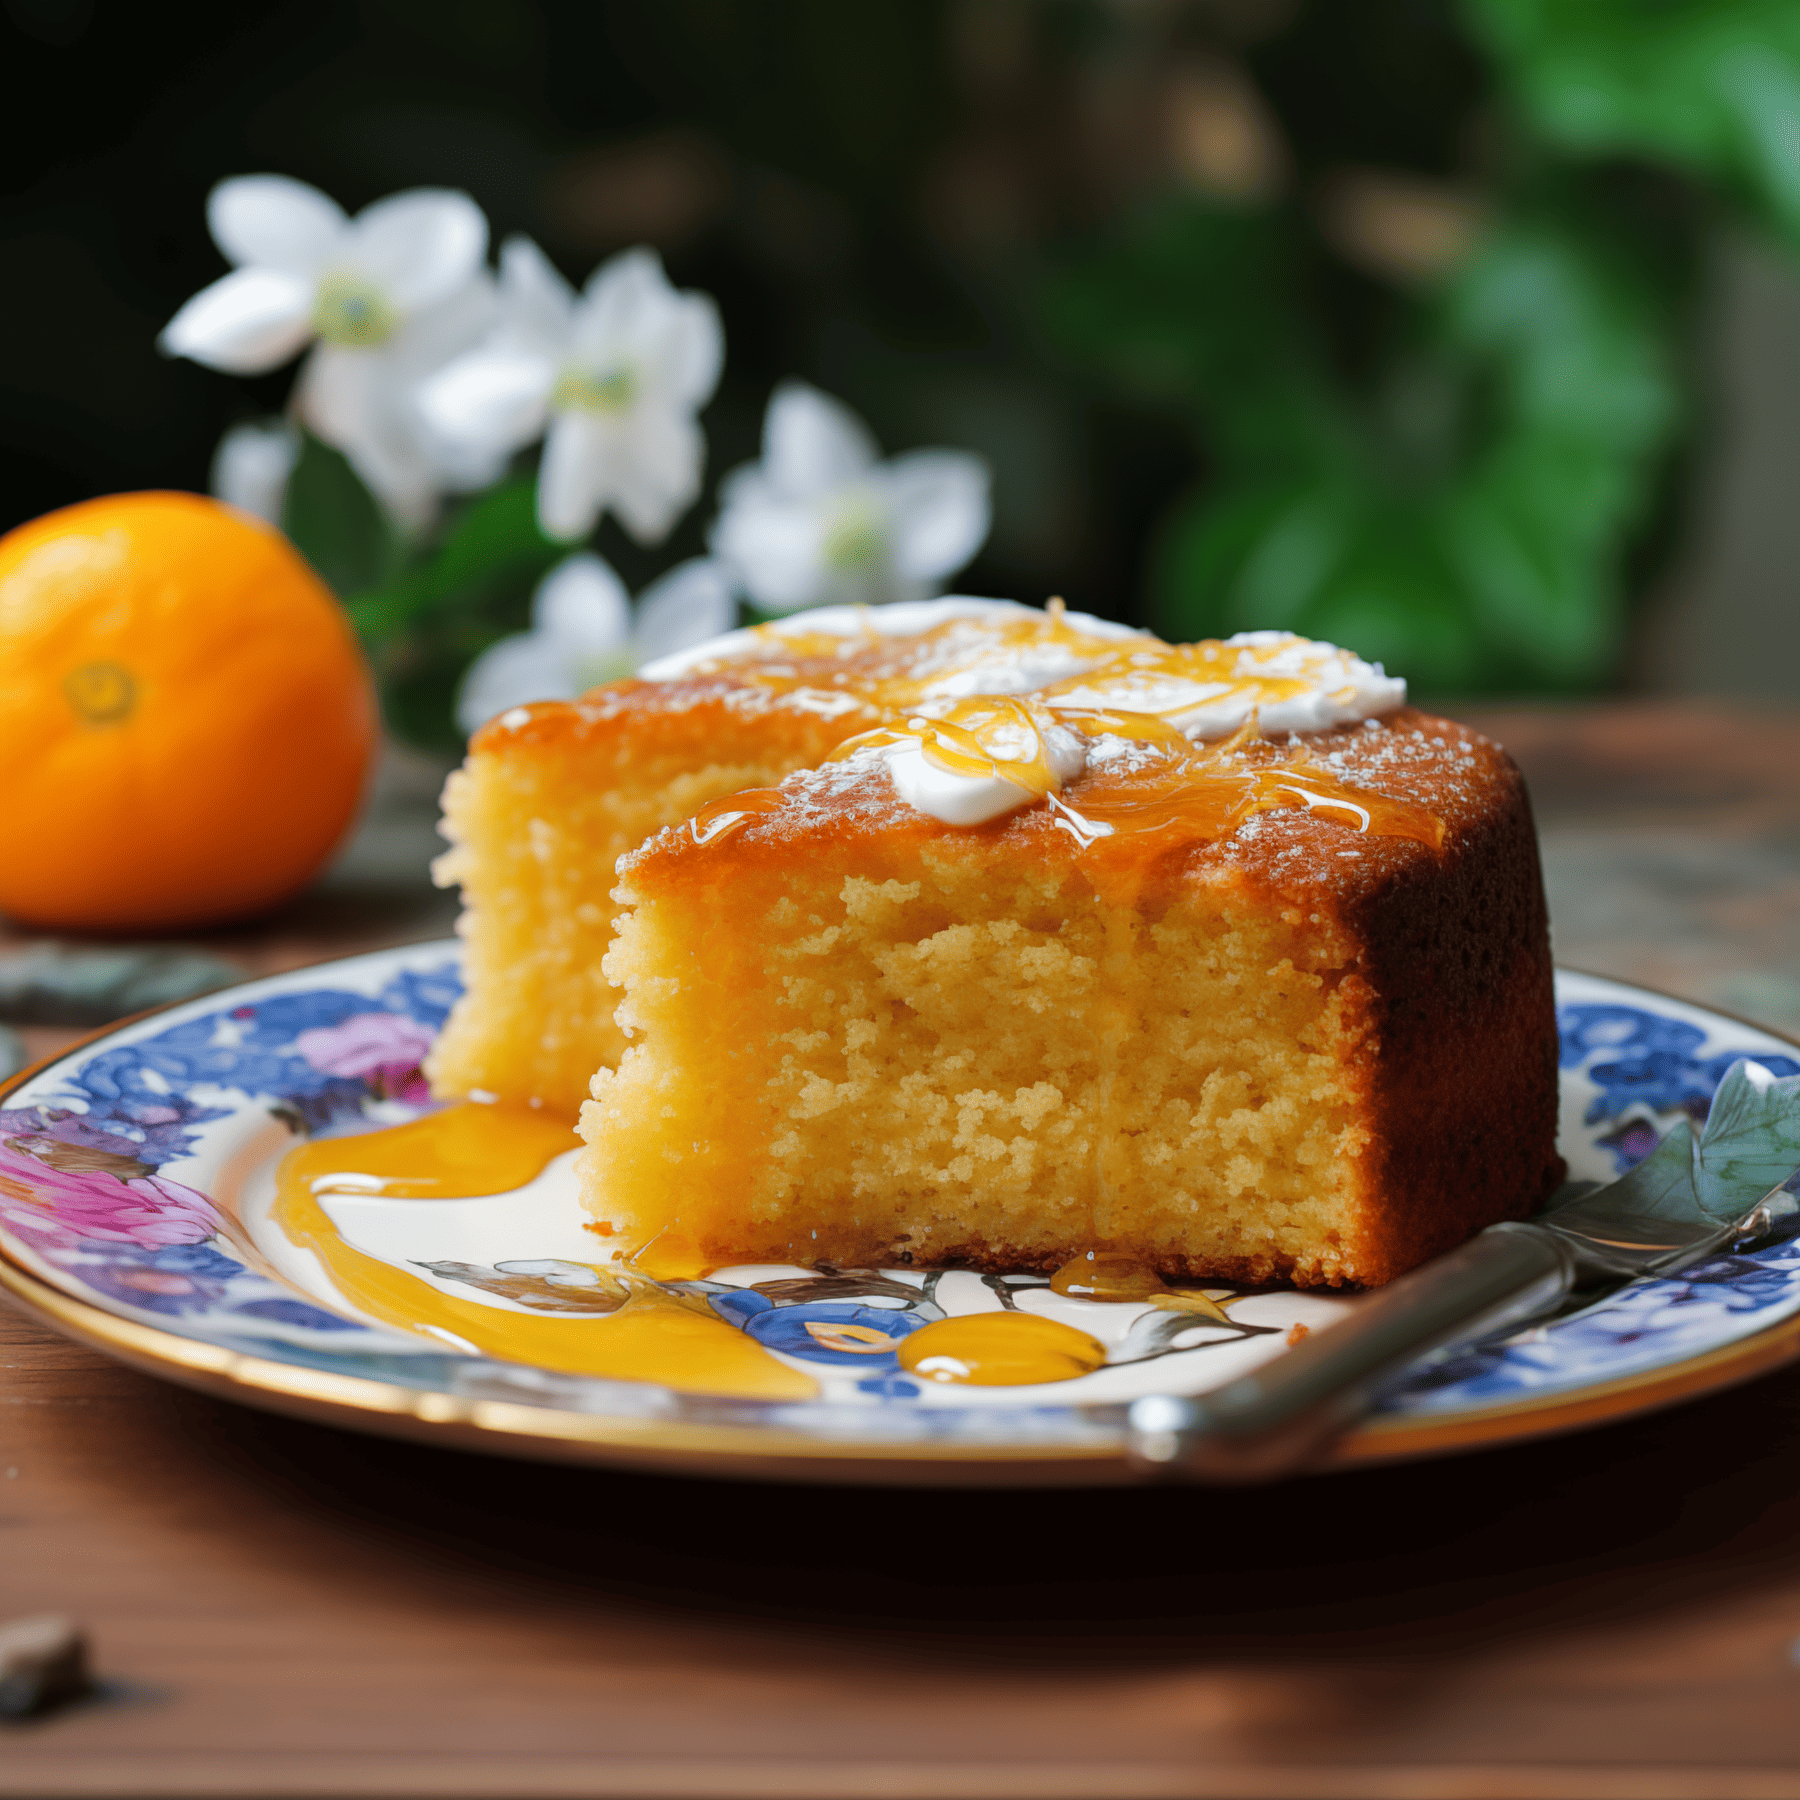 Slice of Tunisian Orange Cake with thick syrup drizzled